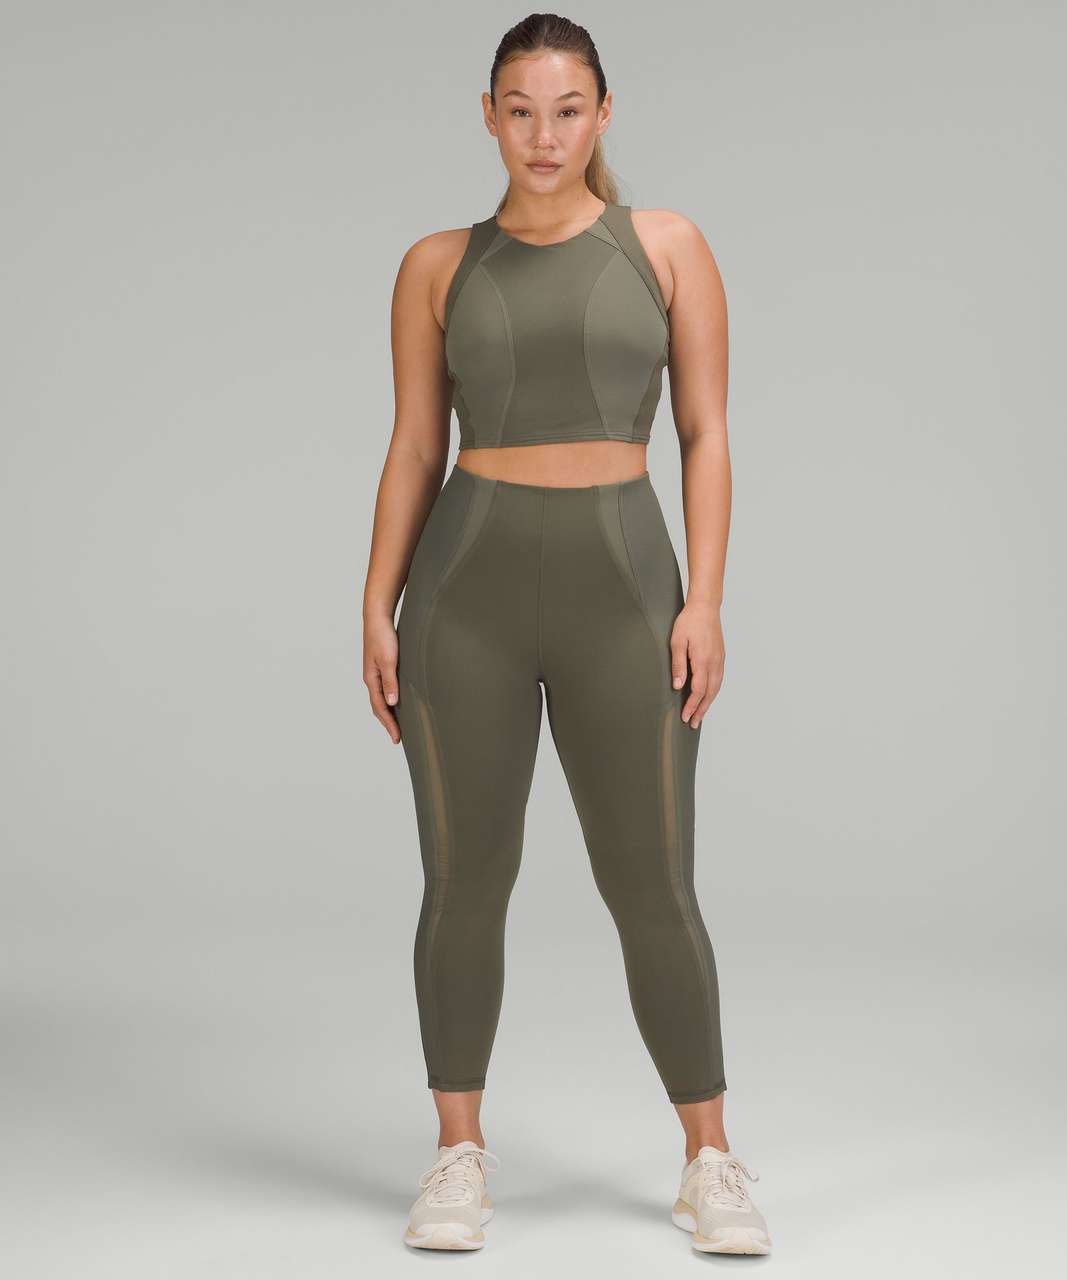 Lululemon Everlux and Mesh Contour Fit Super-High-Rise Training Tight 25" - Army Green